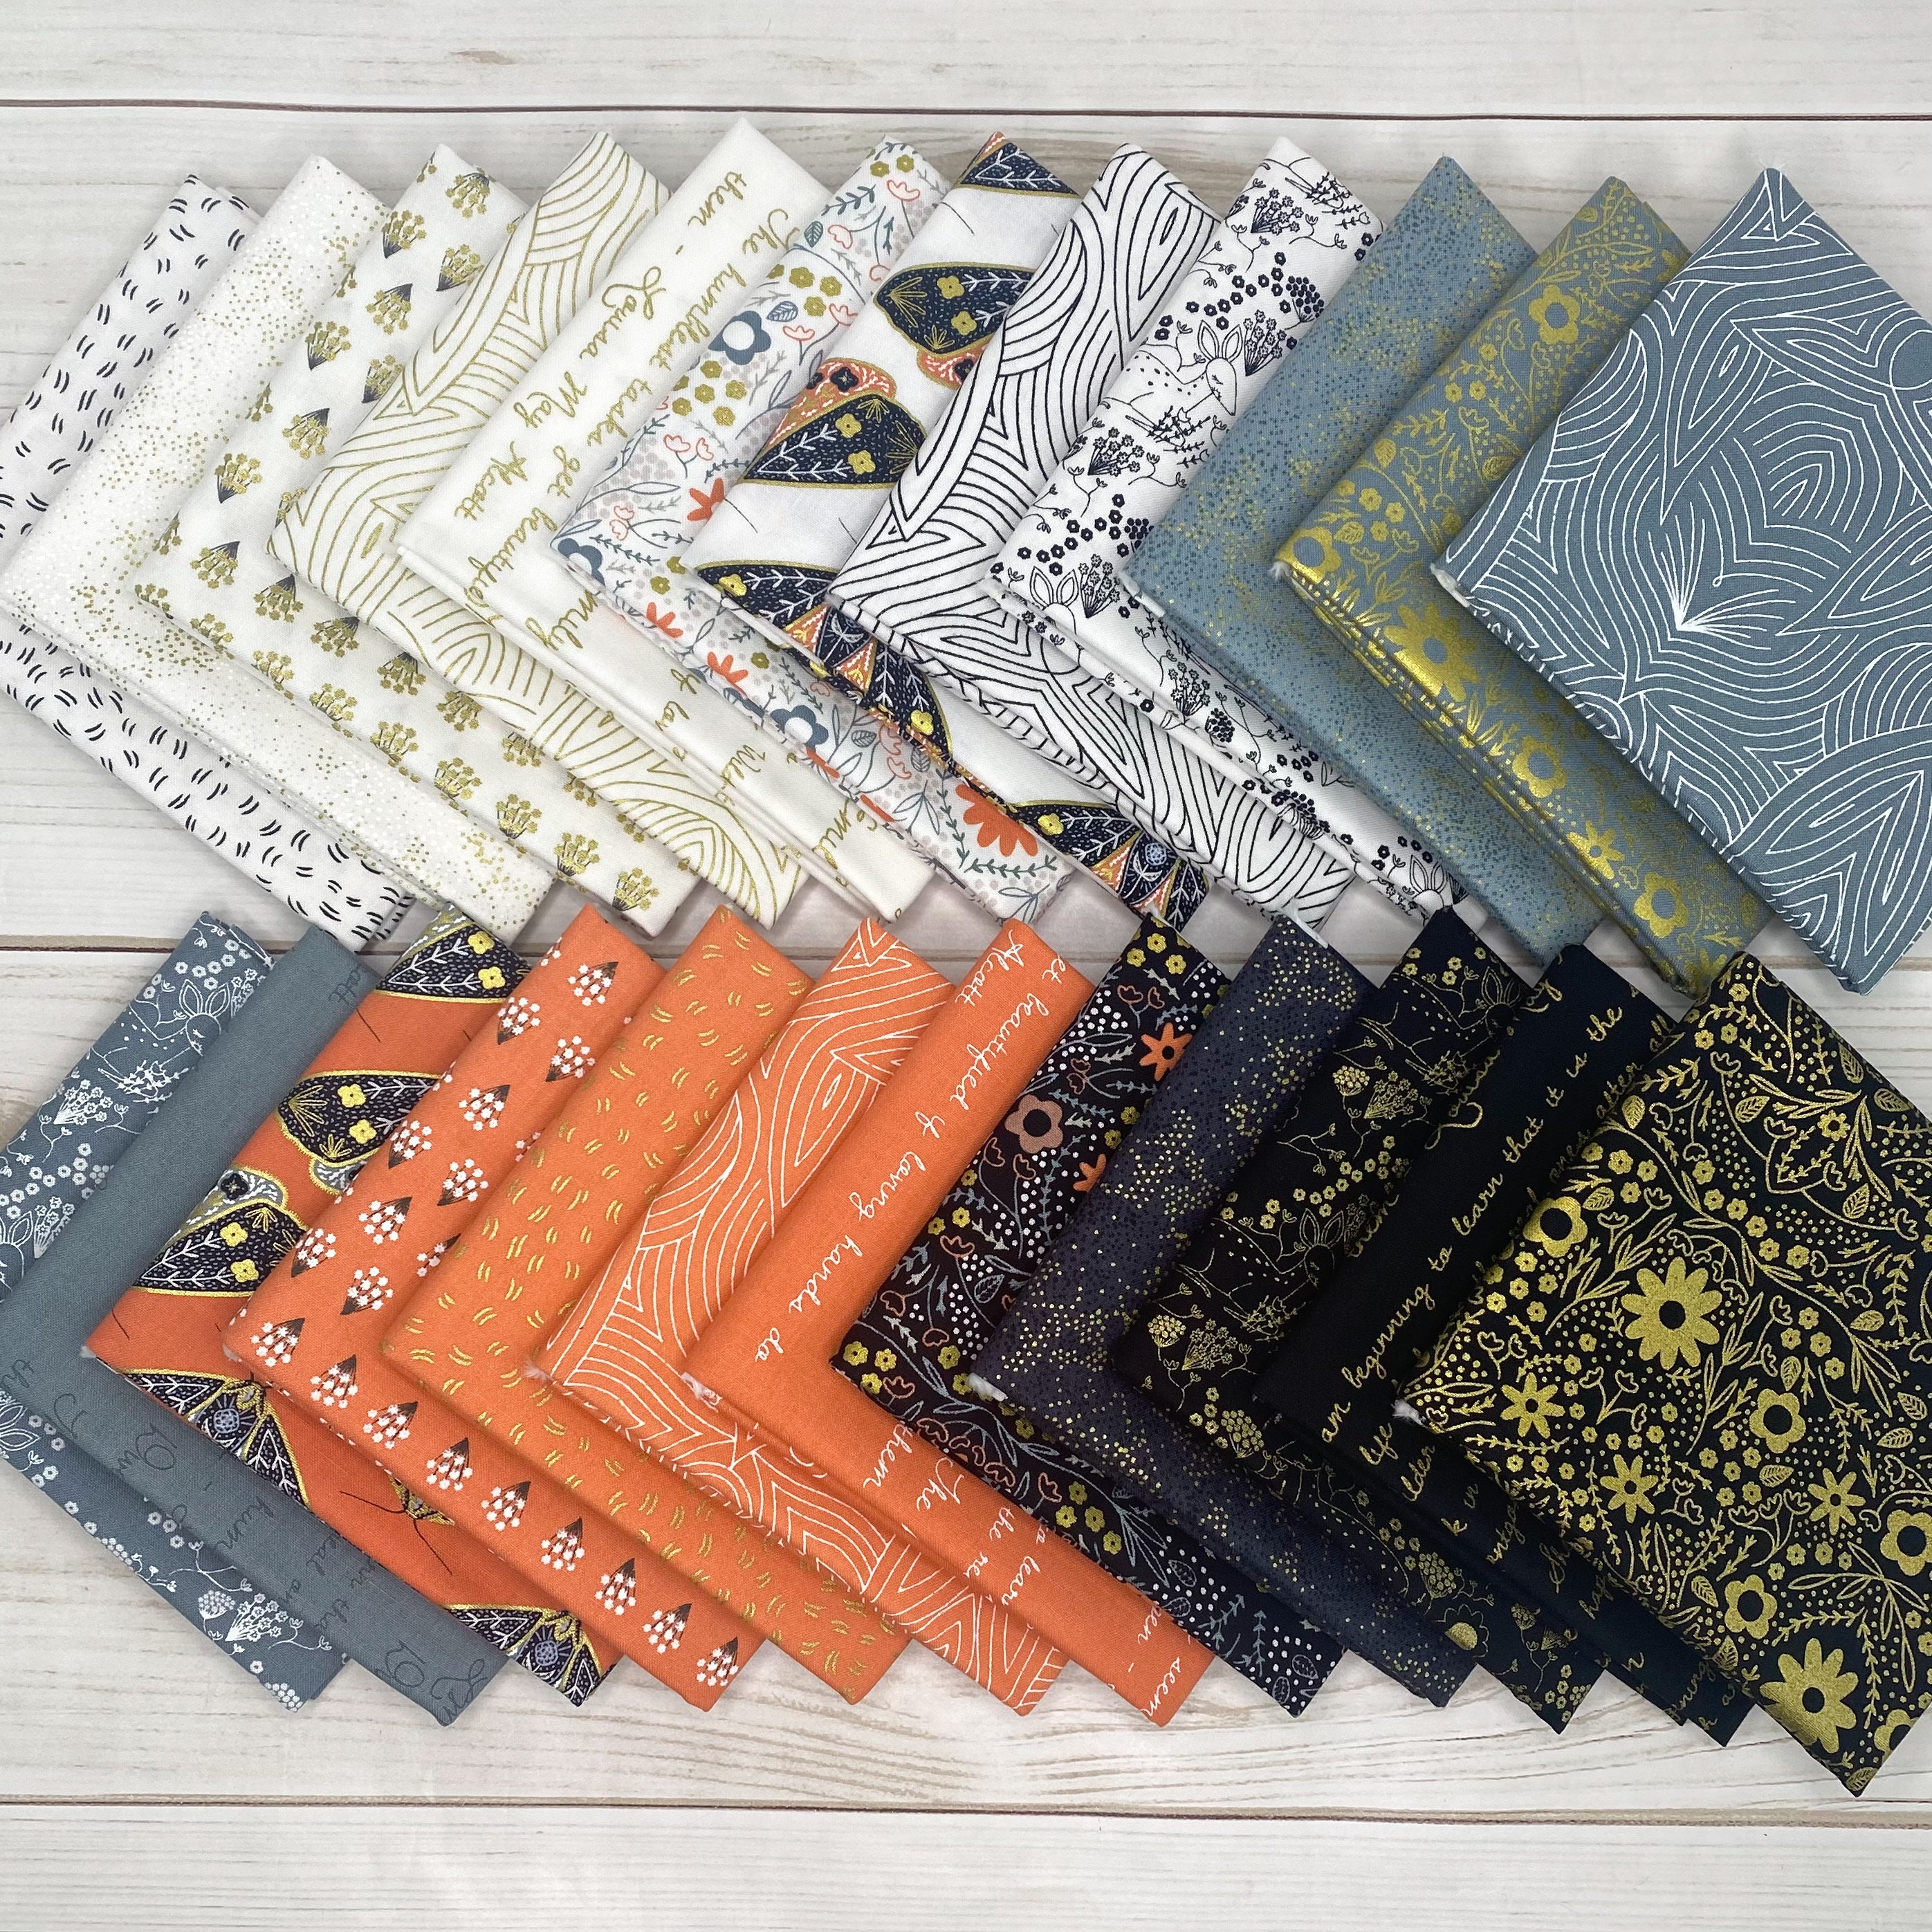 Dwell In Possibility Fat Quarter Bundles Designed By Etsy